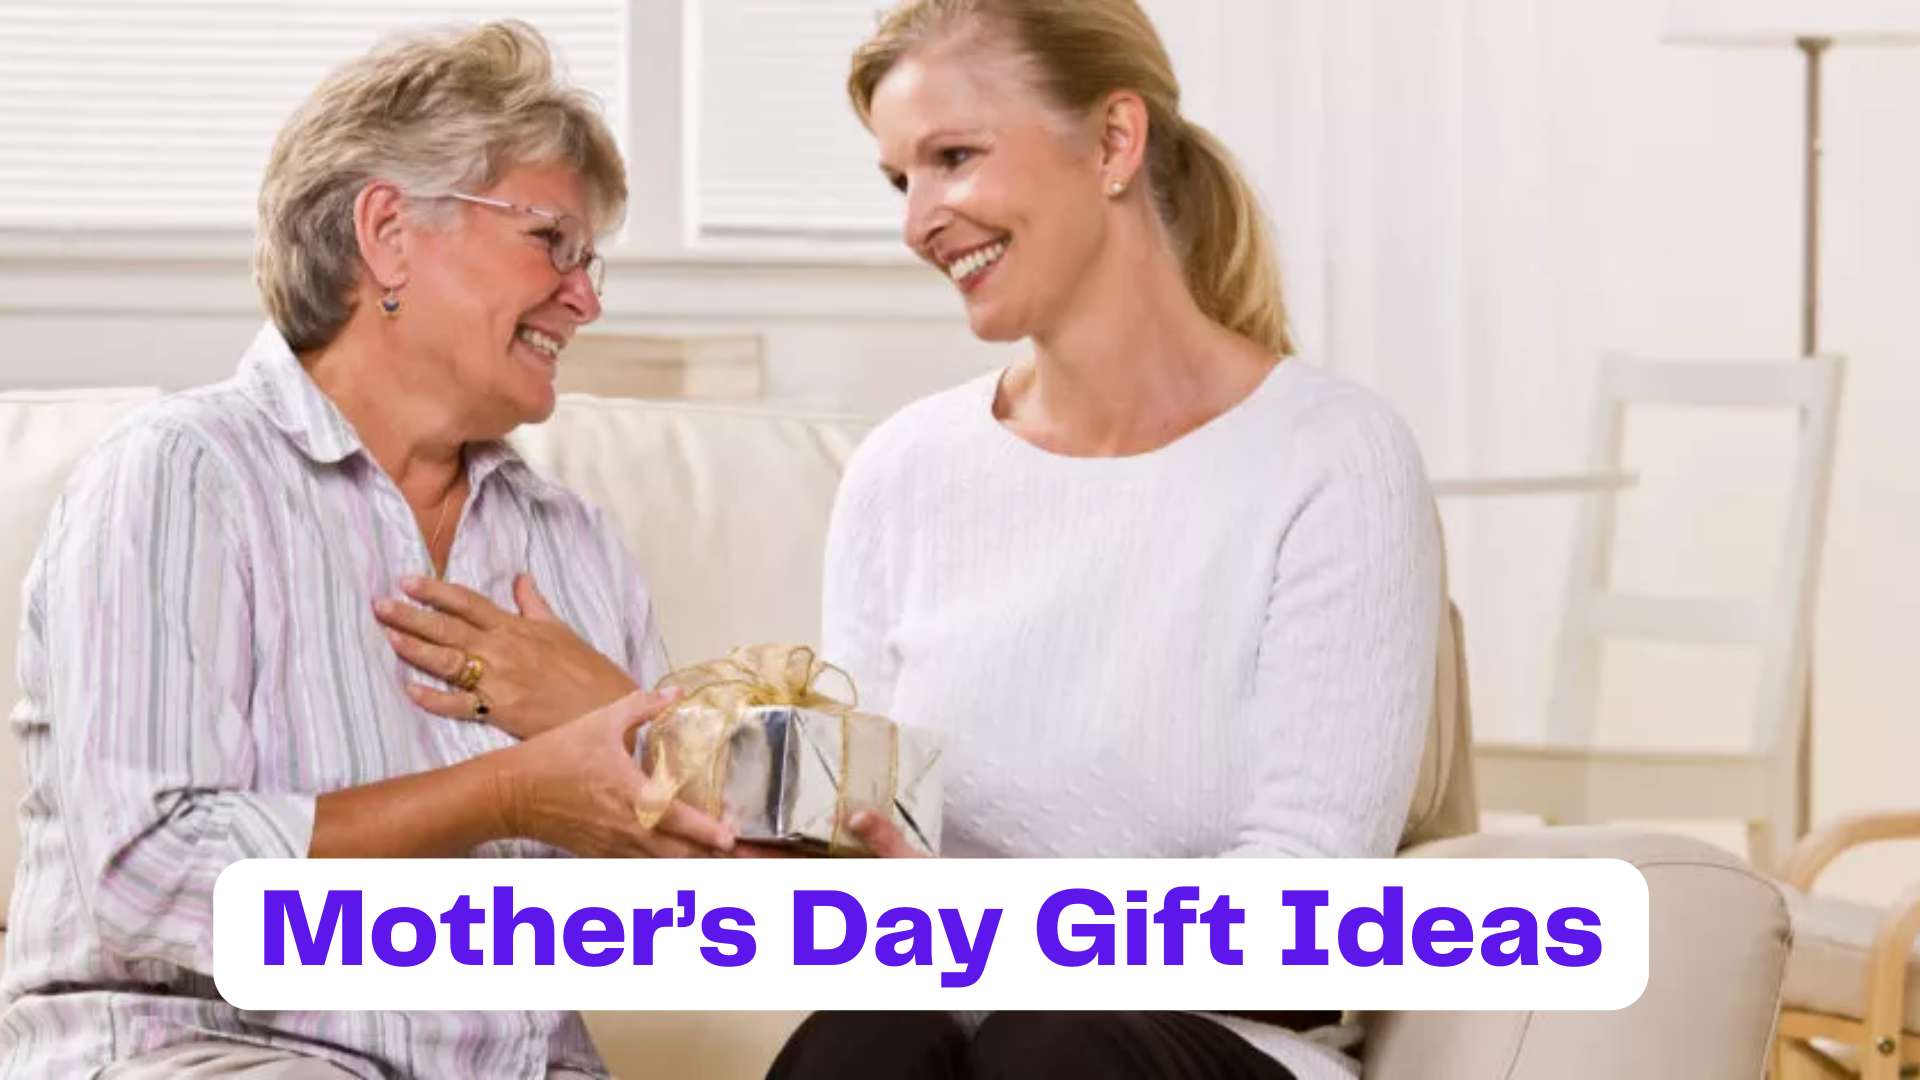 20 things to gift your mom on mother’s day- mother’s day gift ideas